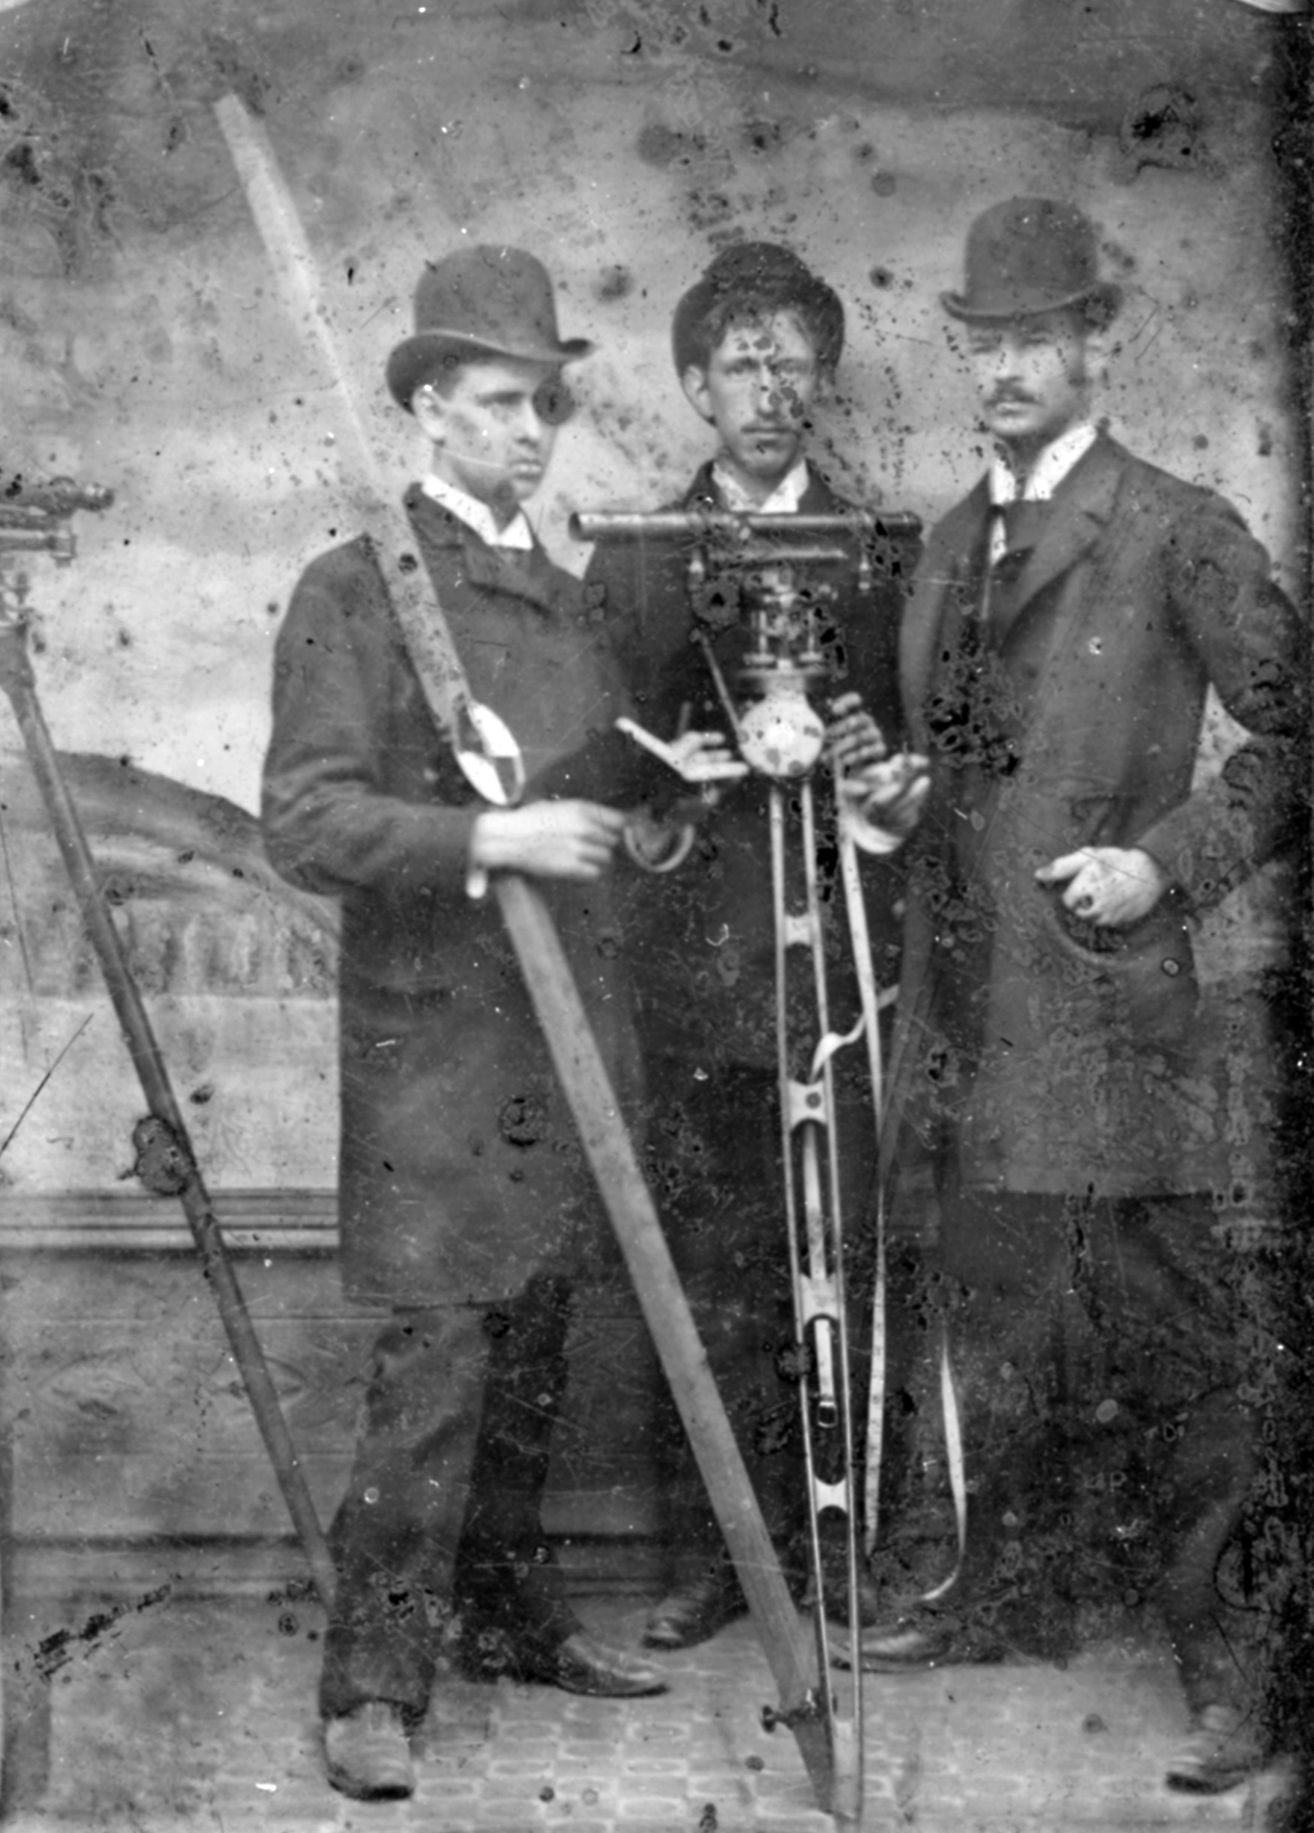 Black and white tintype photograph of three young men posed with surveying equipment.